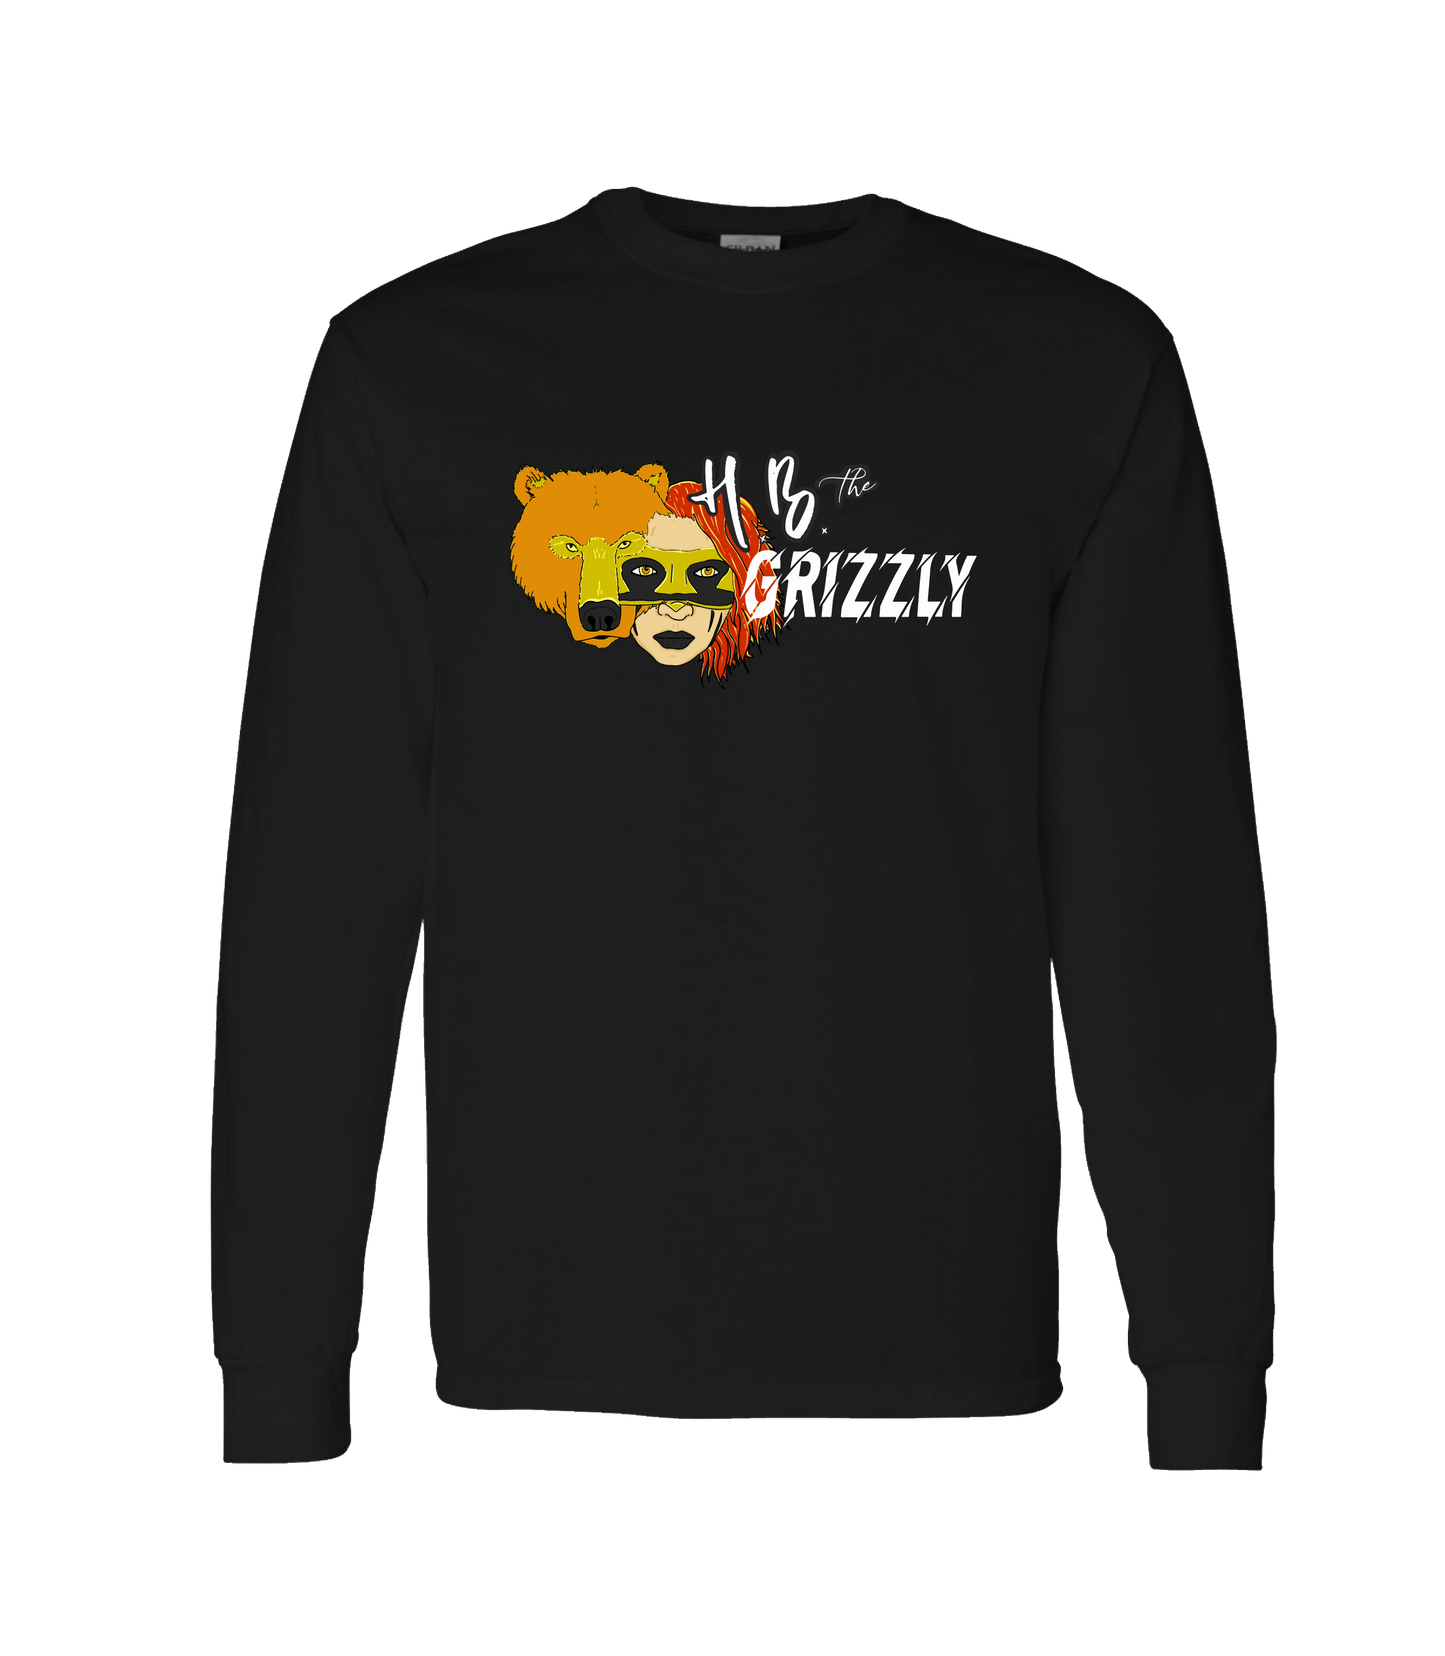 HB The Grizzly - HB&G - Black Long Sleeve T